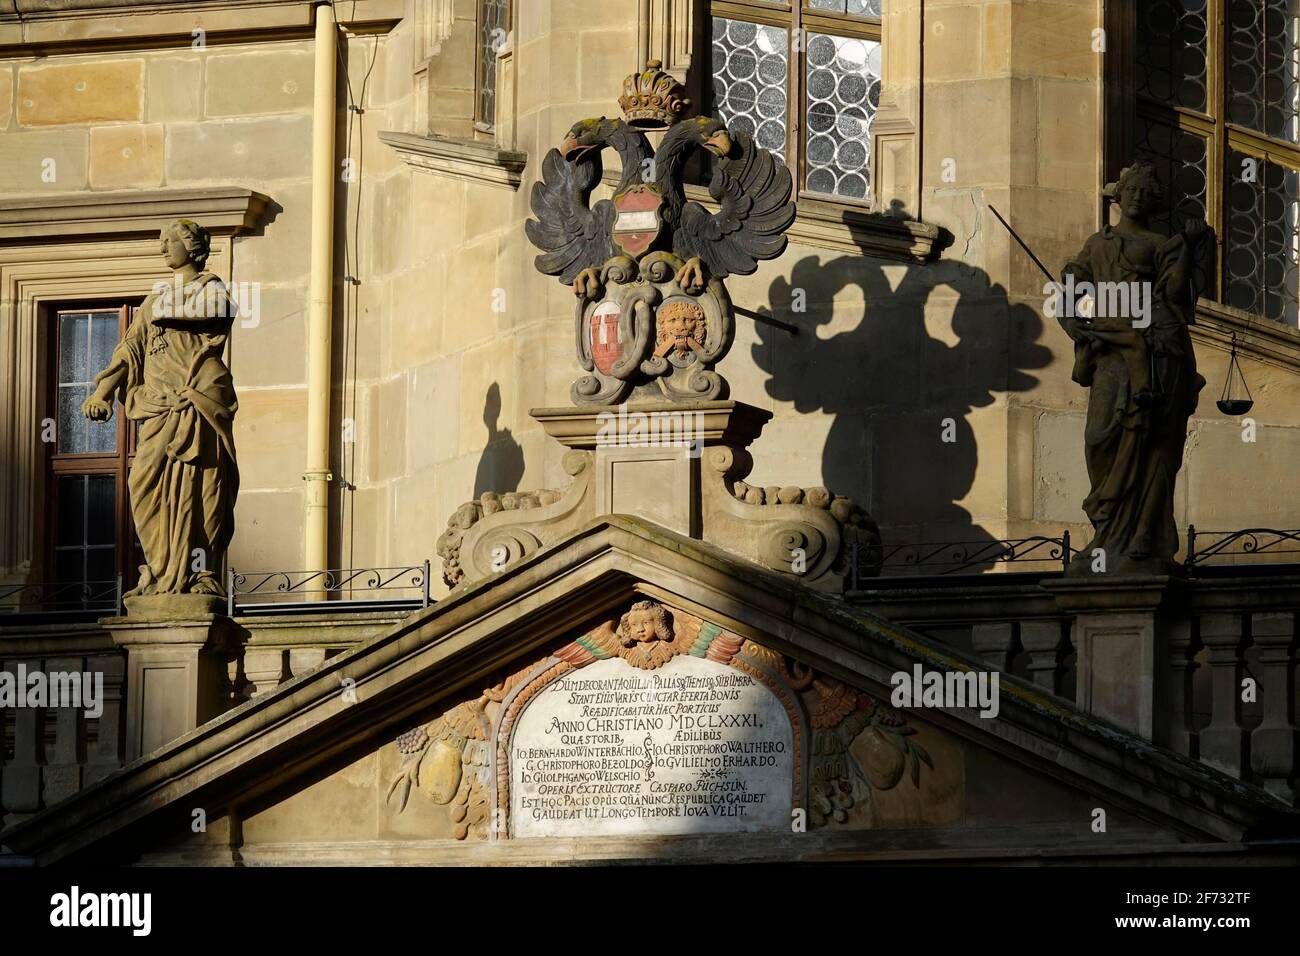 Tympanum or gable above the entrance of the town hall with statues and town coat of arms, Rothenburg ob der Tauber, County Ansbach, Middle Franconia Stock Photo